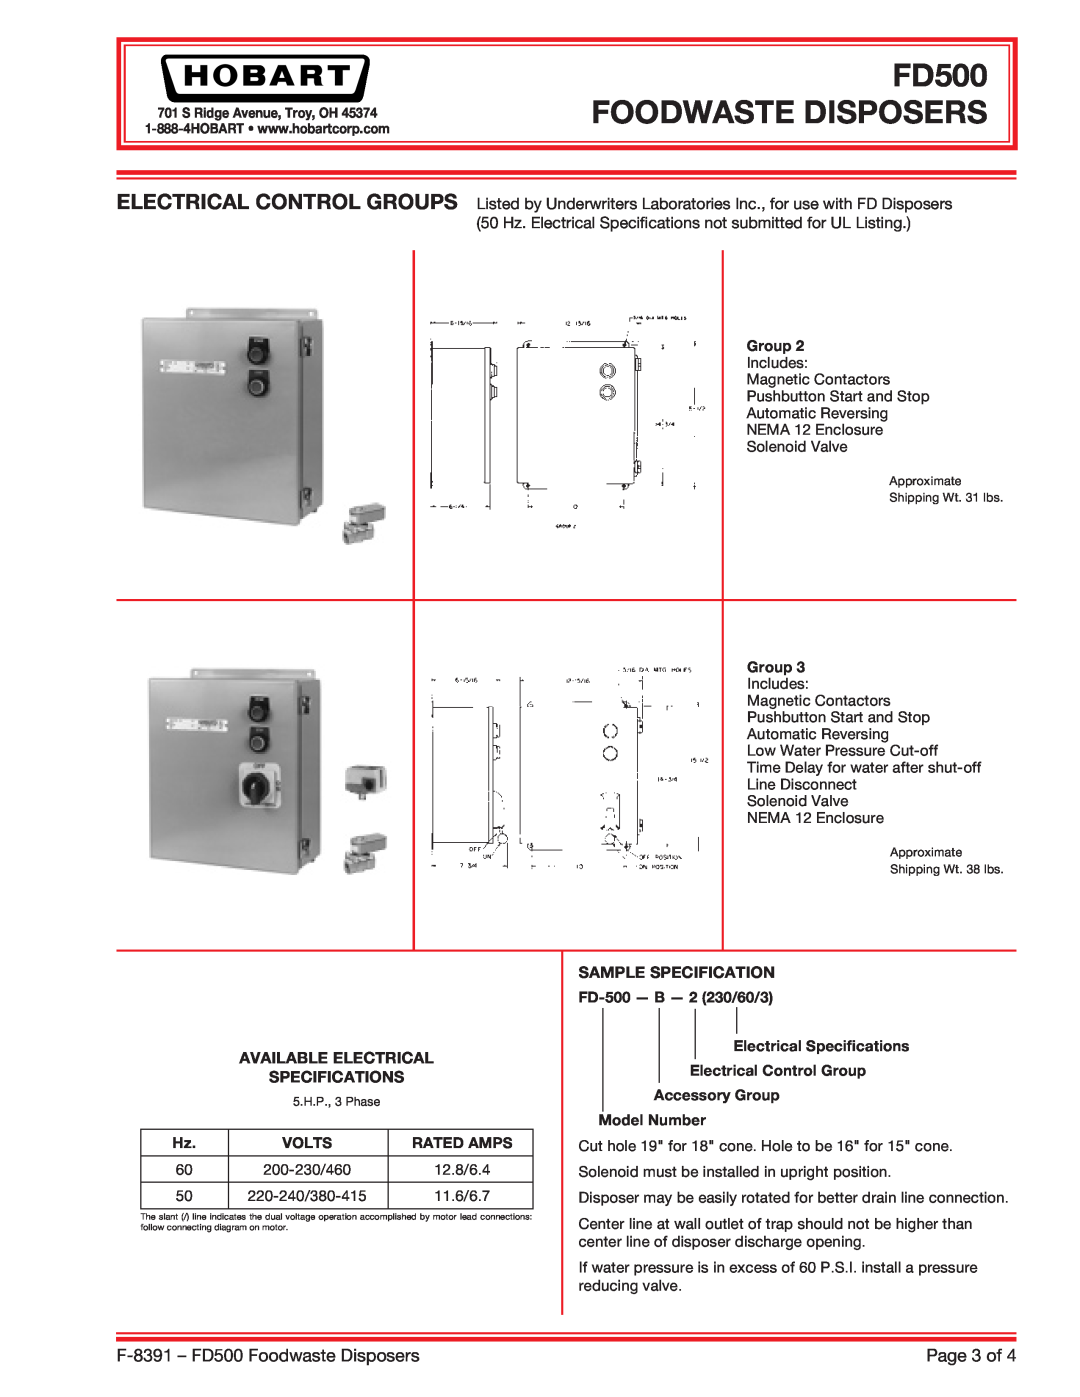 Hobart FD500 FOODWASTE DISPOSERS, F-8391- FD500 Foodwaste Disposers, Page 3 of, Available Electrical Specifications 